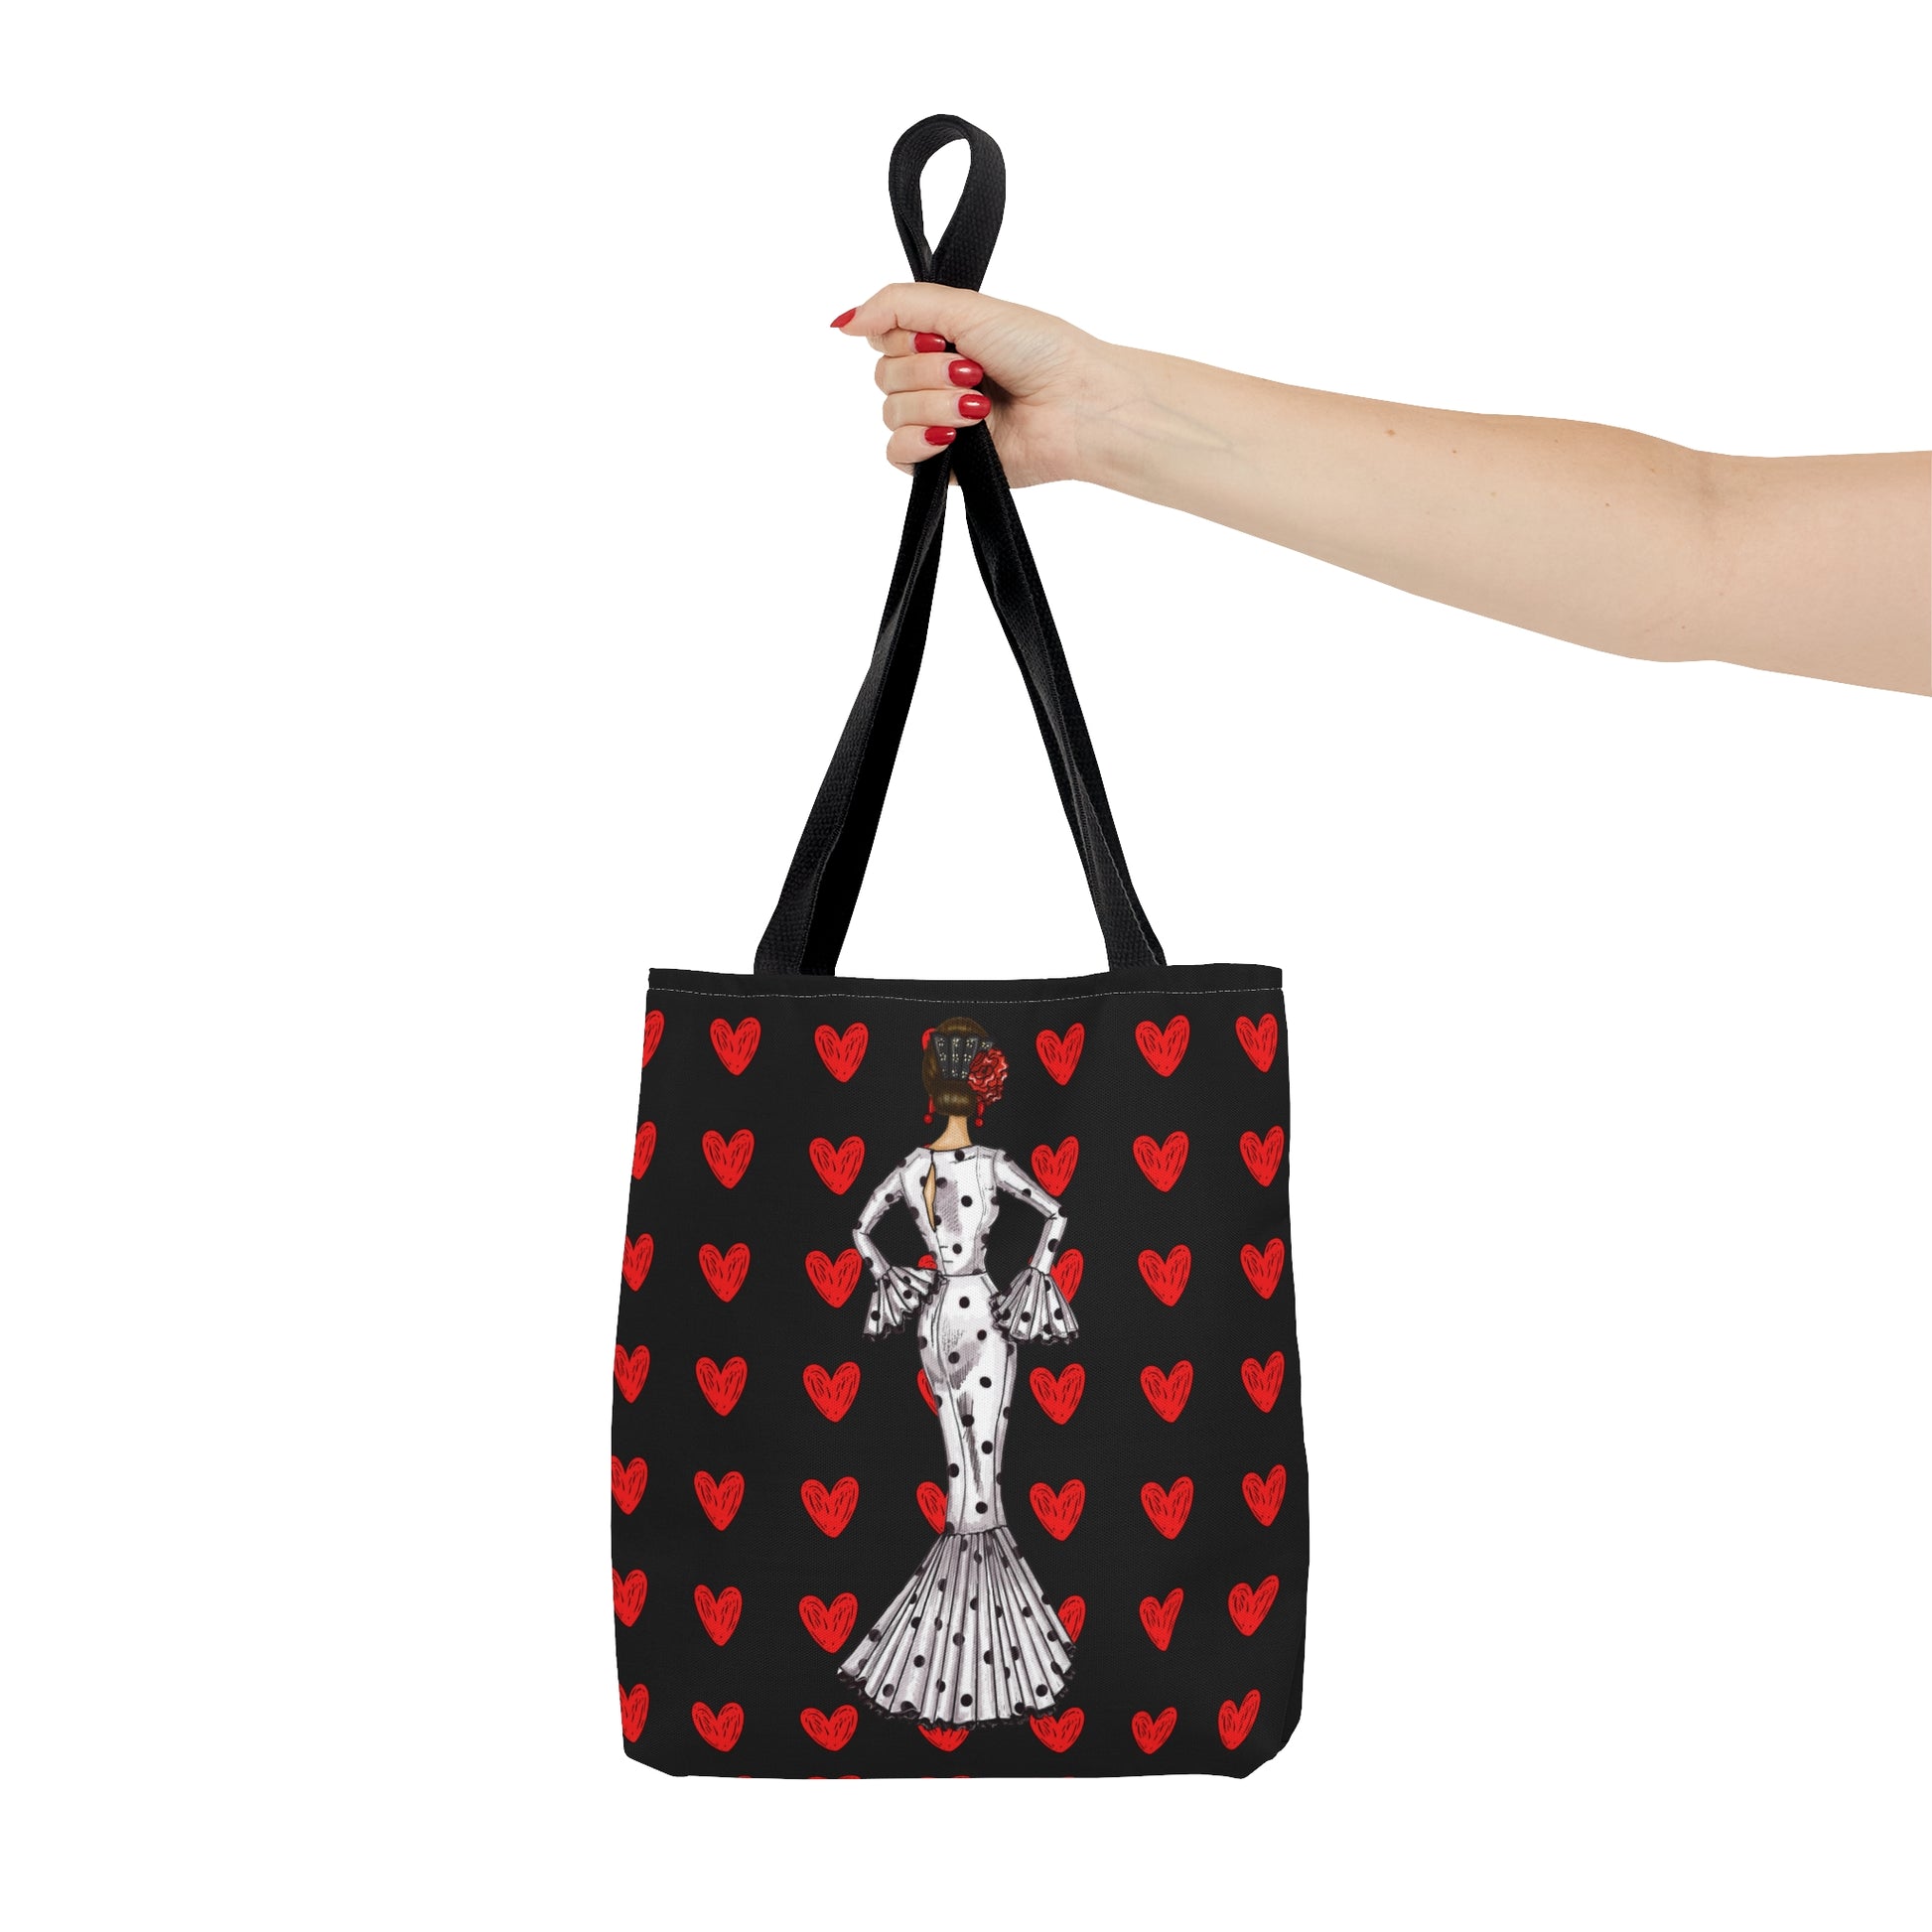 a woman's hand holding a black and red bag with a dalmatian